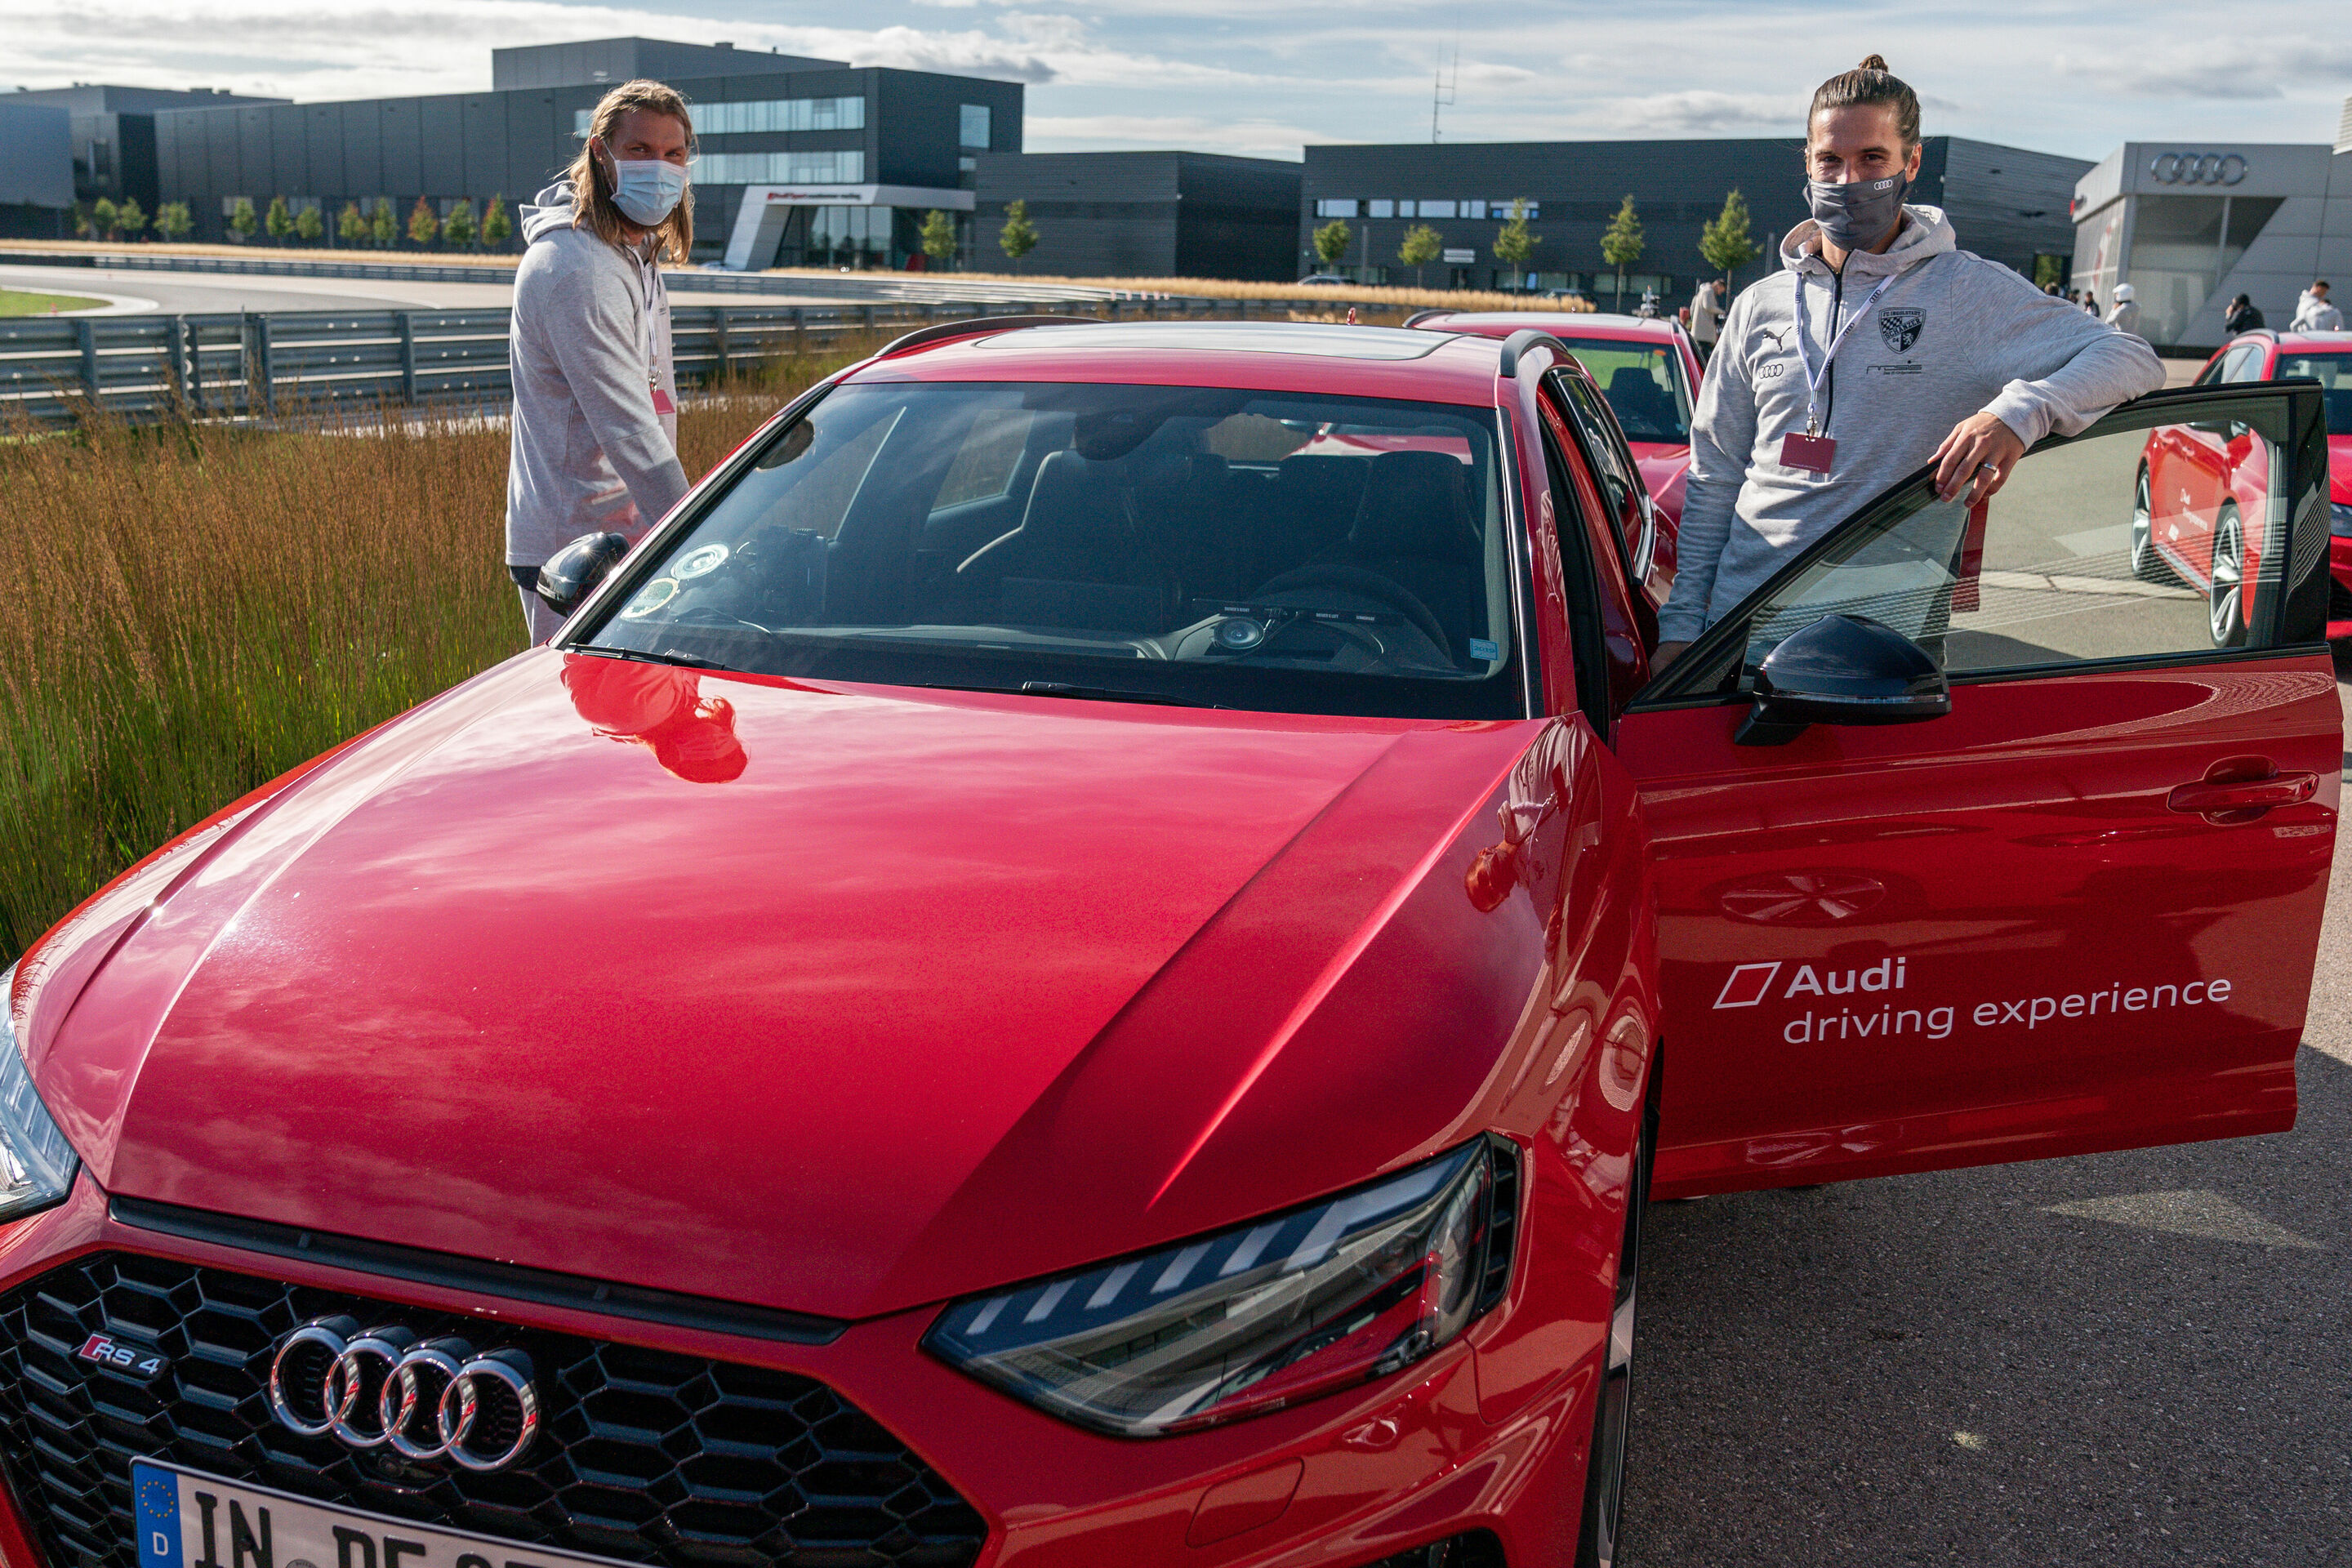 FC Ingolstadt 04 at the Audi driving experience